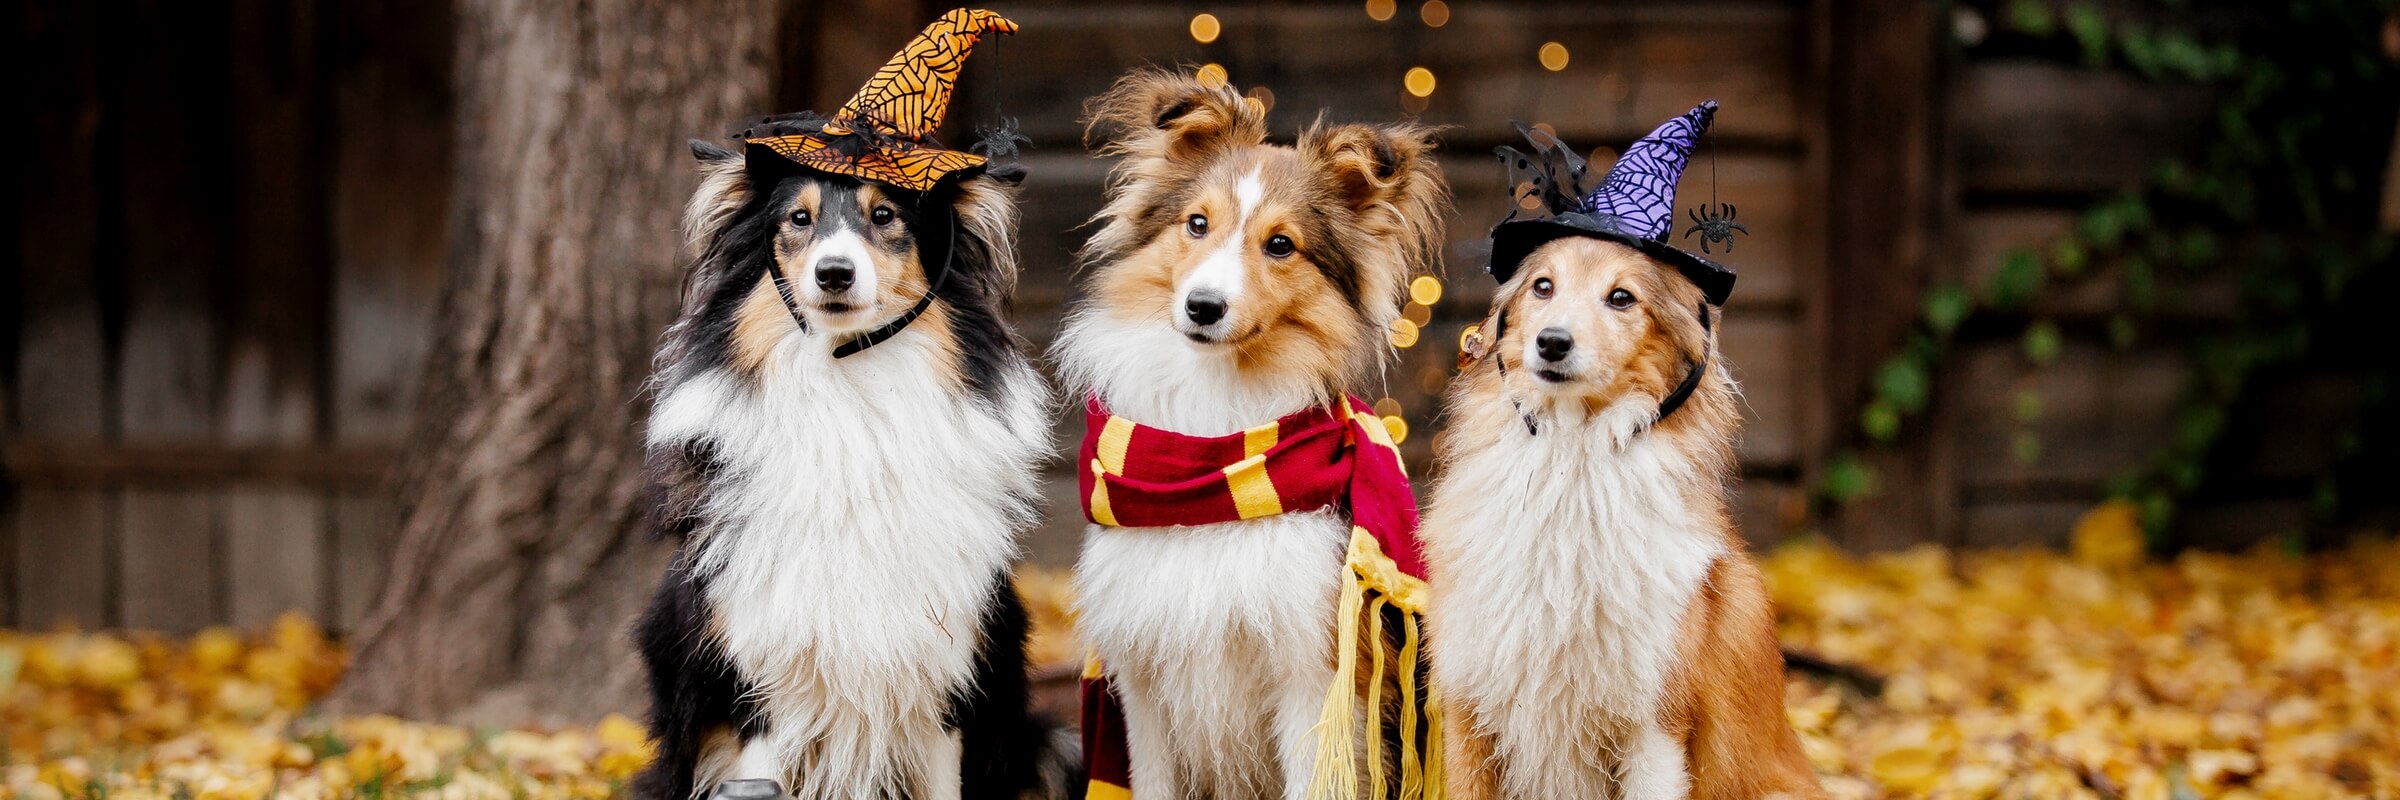 Three Shelties dressed as witches and Harry Potter sitting in a backyard filled with fallen leaves